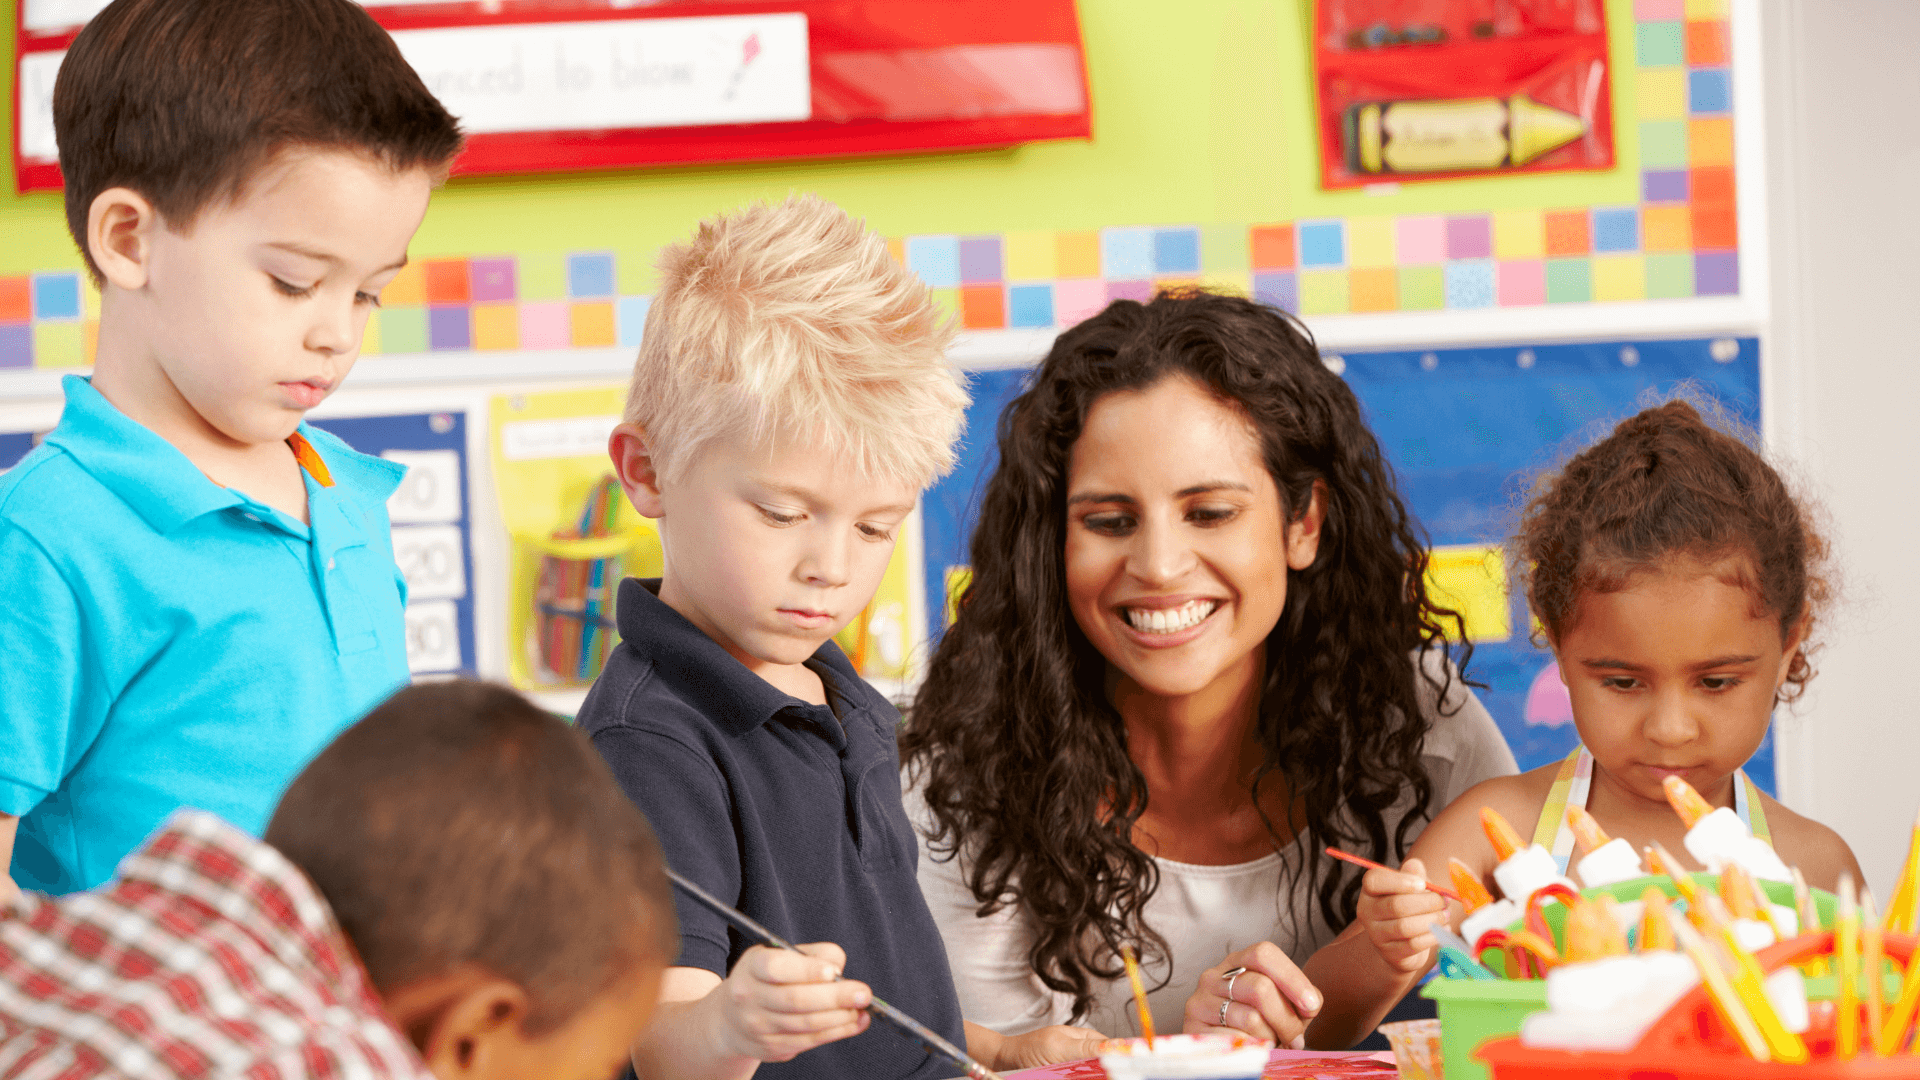 adapting instruction to different learning styles as one of the classroom management strategies for new teachers